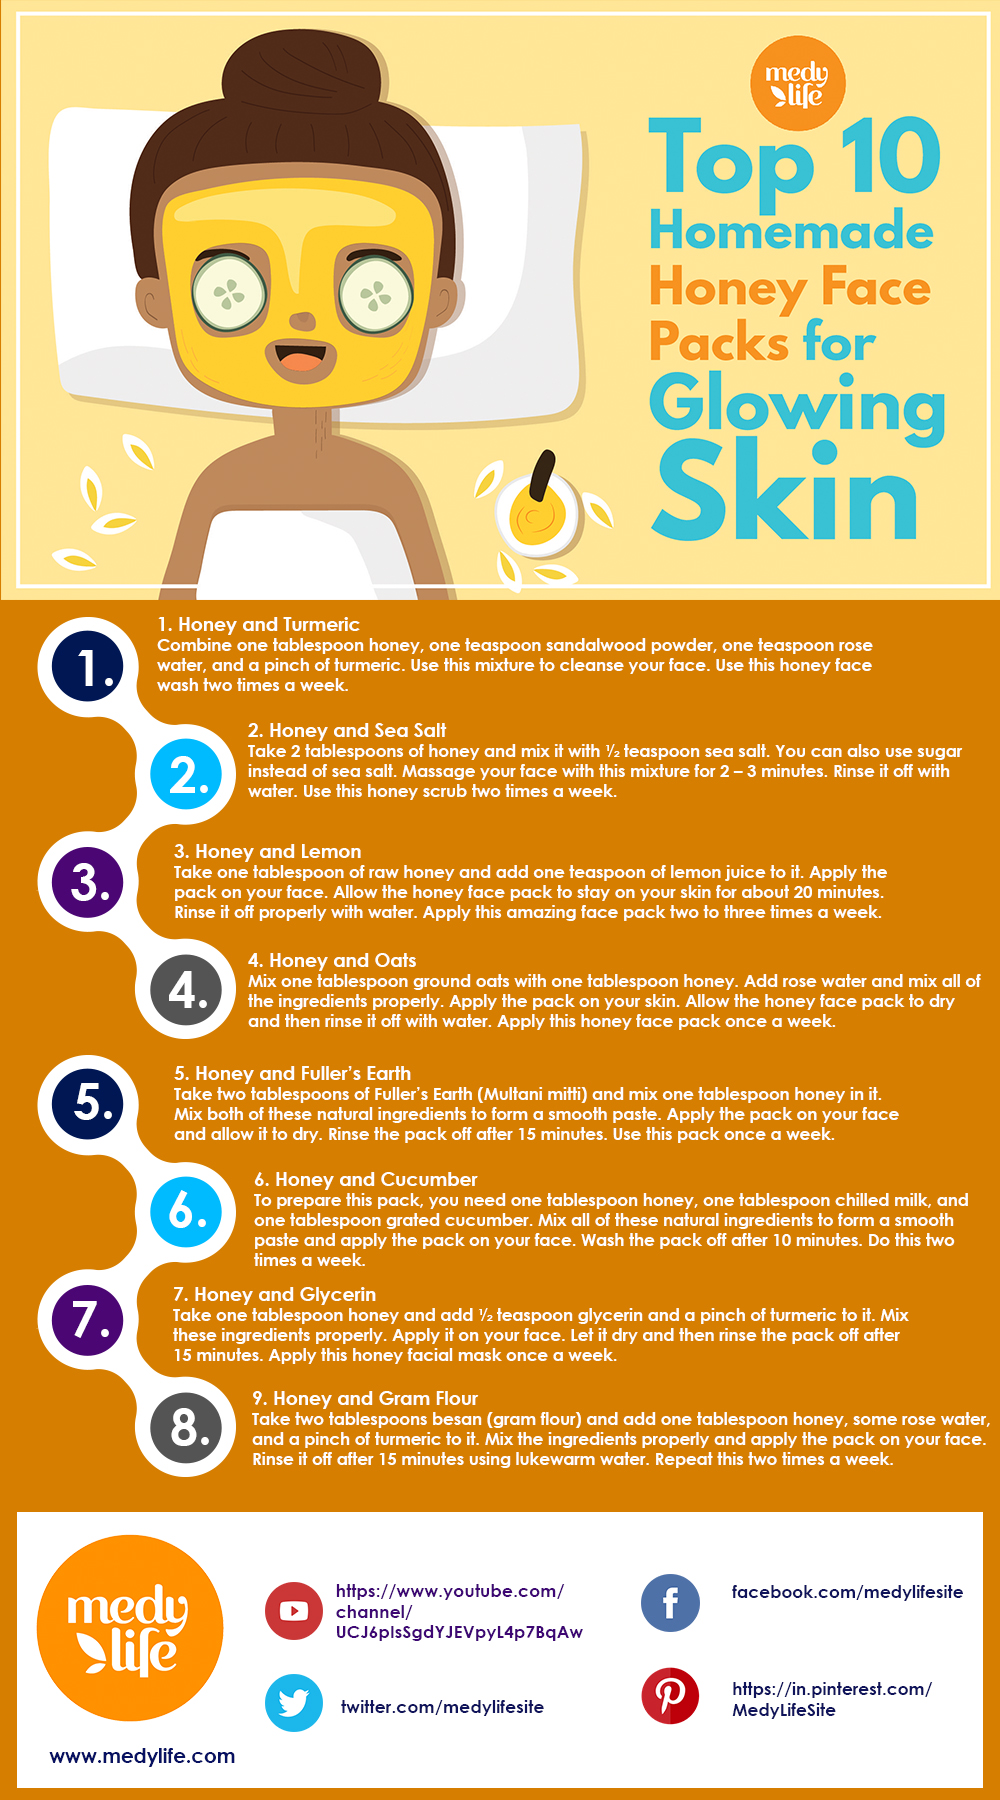 Top 10 Homemade Honey Face Packs for Glowing Skin INFO